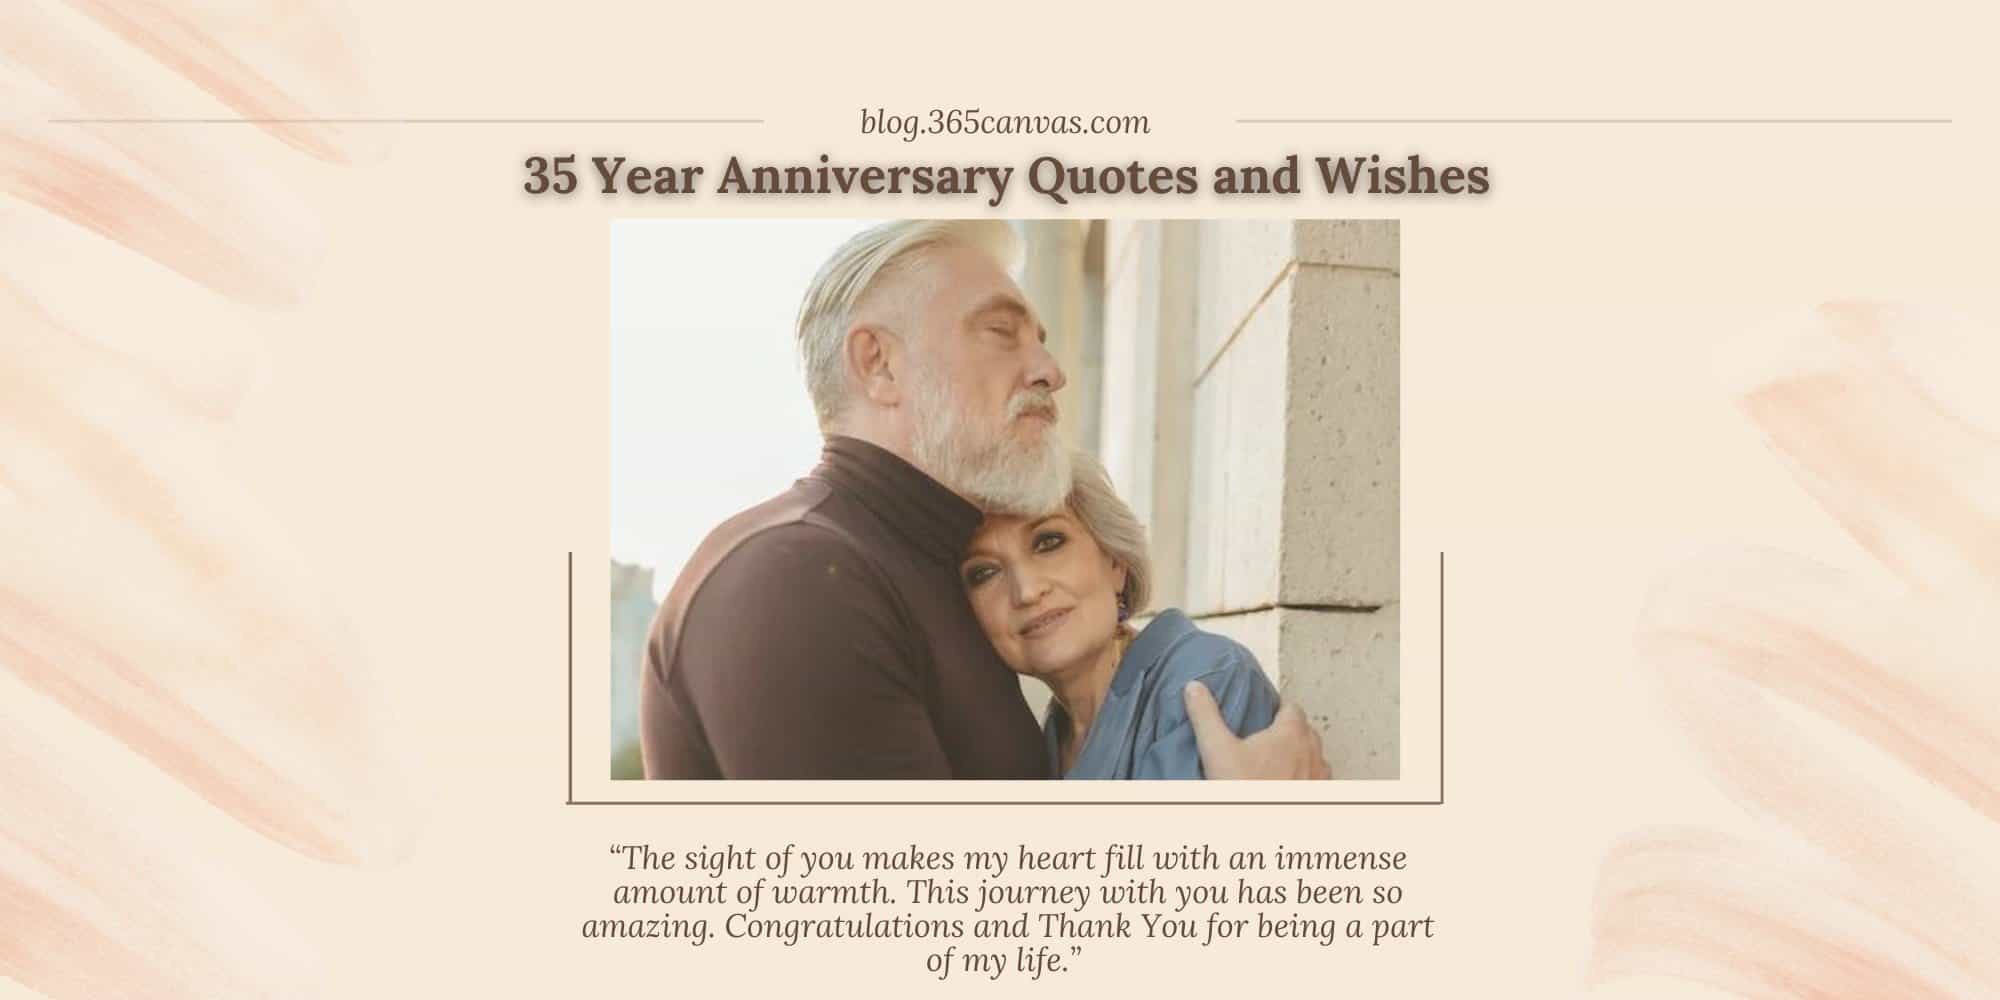 50+ Sweetest 35th Year Coral Wedding Anniversary Quotes, Wishes